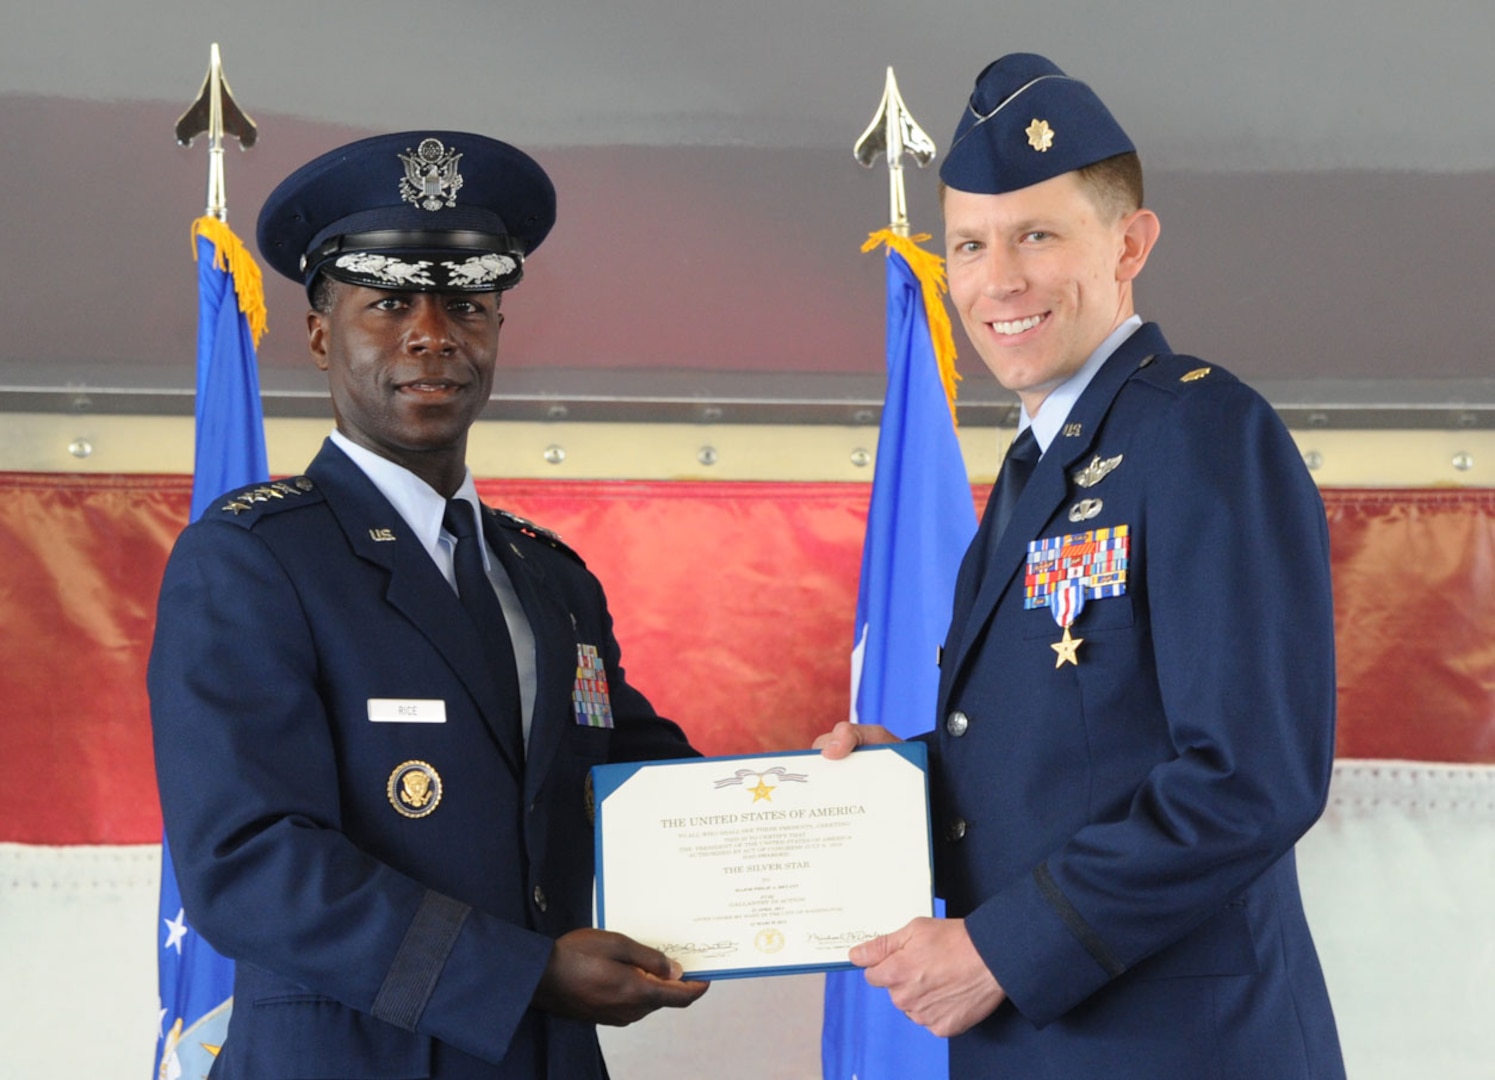 Maj. Philip Bryant, combat search and rescue pilot, was presented the
Silver Star medal at the 19th Air Force's inactivation ceremony Thursday at
Joint Base San Antonio-Randolph.  Gen. Edward A. Rice, Jr., Air Education
Training Command commander, presented the third highest military decoration
to Bryant for his participation in a recovery mission of two U.S. Army
pilots who were downed in the Allasay Valley, an enemy controlled area east
of Bagram Airfield, Afghanistan on April 23, 2011.  (U.S. Air Force photo by Rich McFadden)